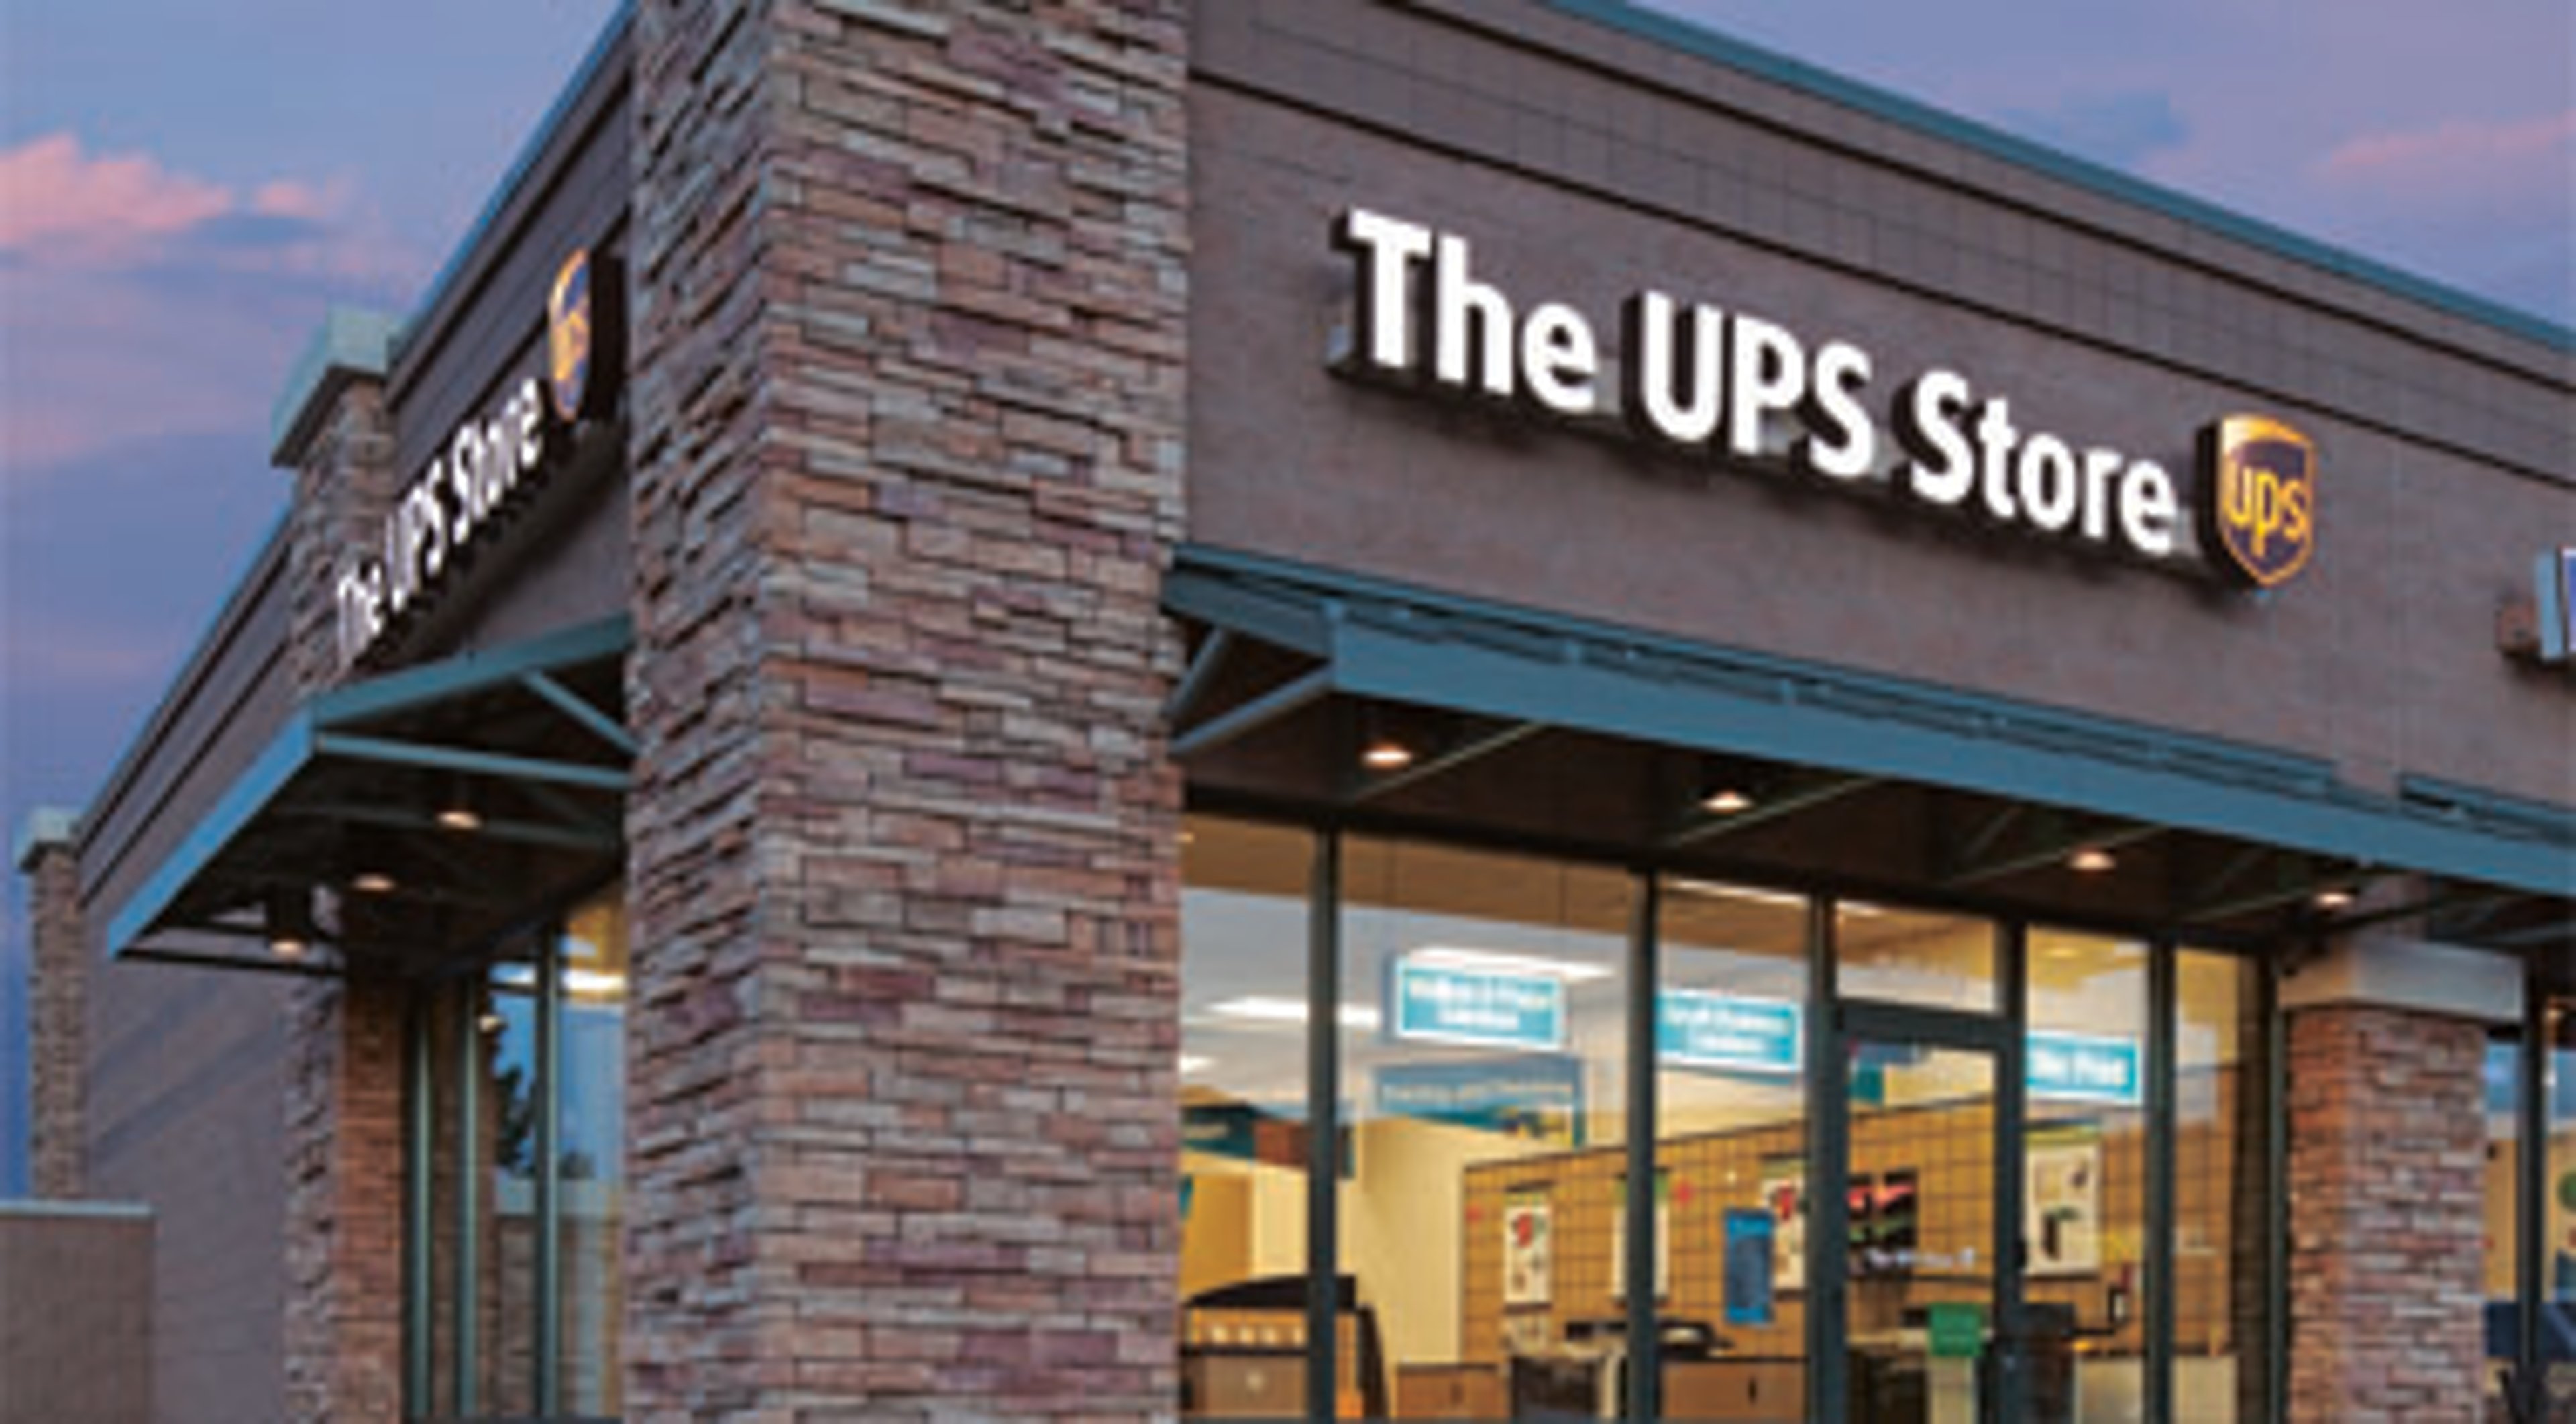 A UPS Storefront location